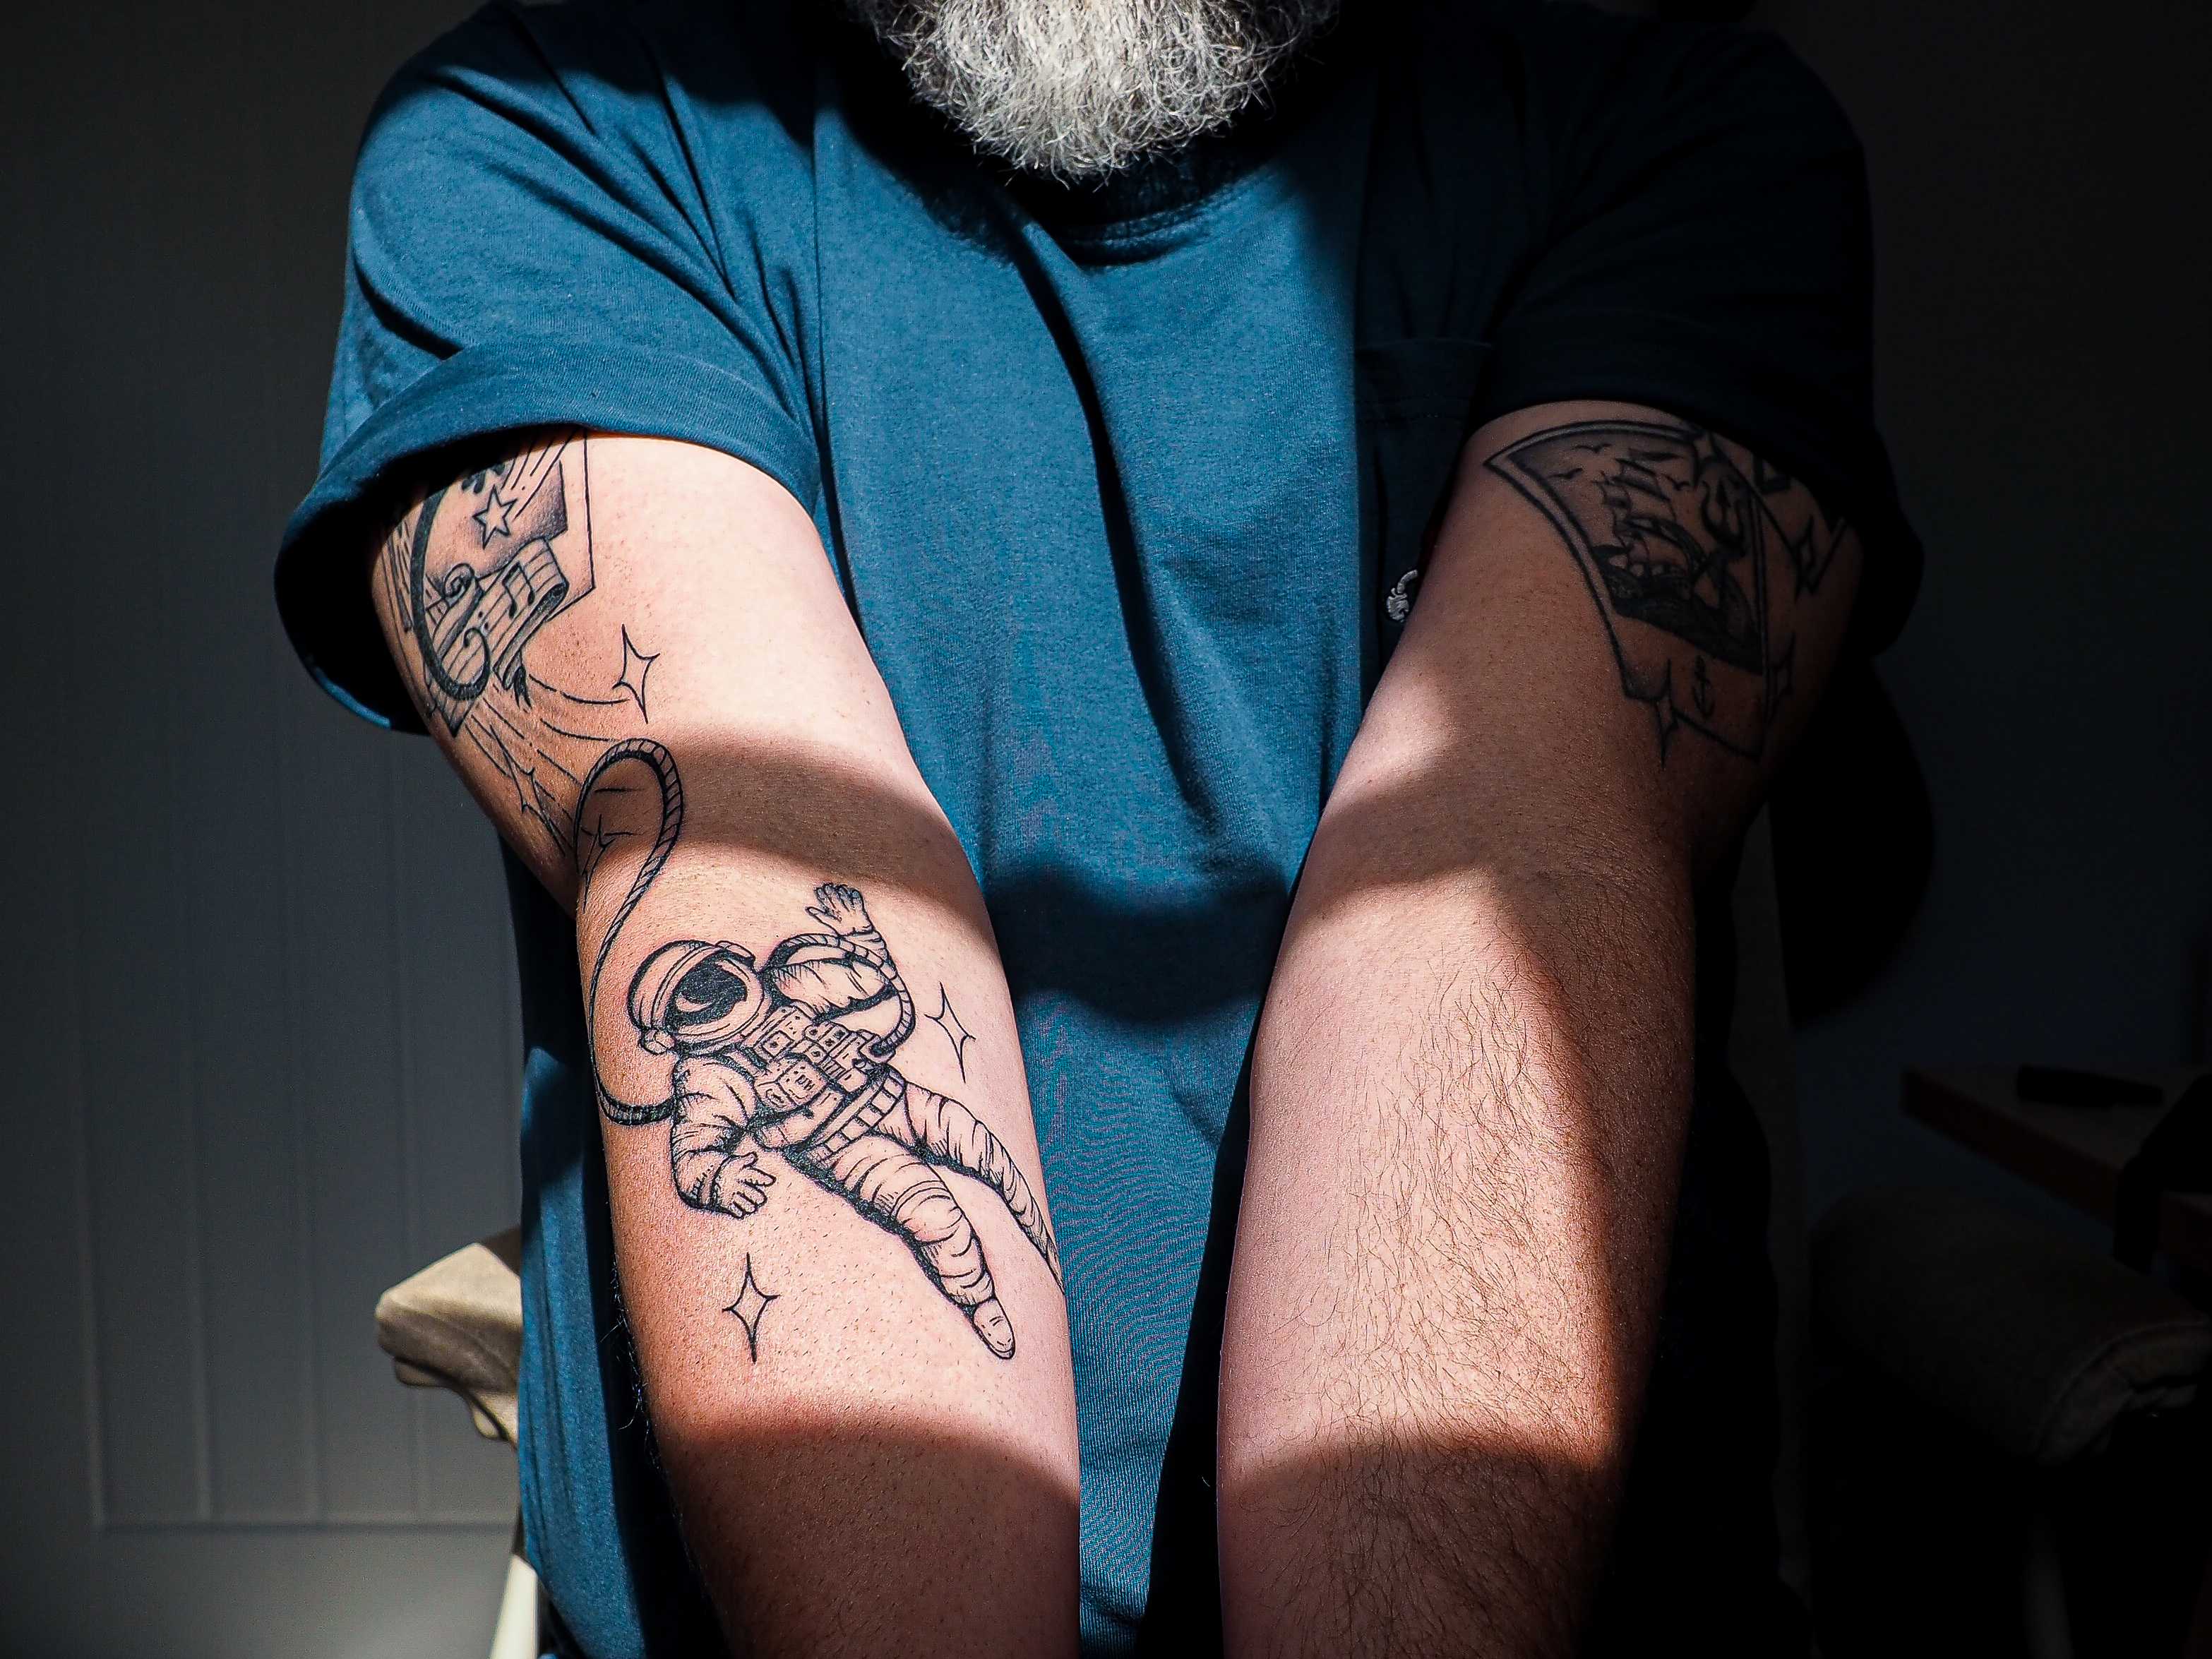 A tightly cropped photo of my arms, showing my tattoos, illuminated by window light